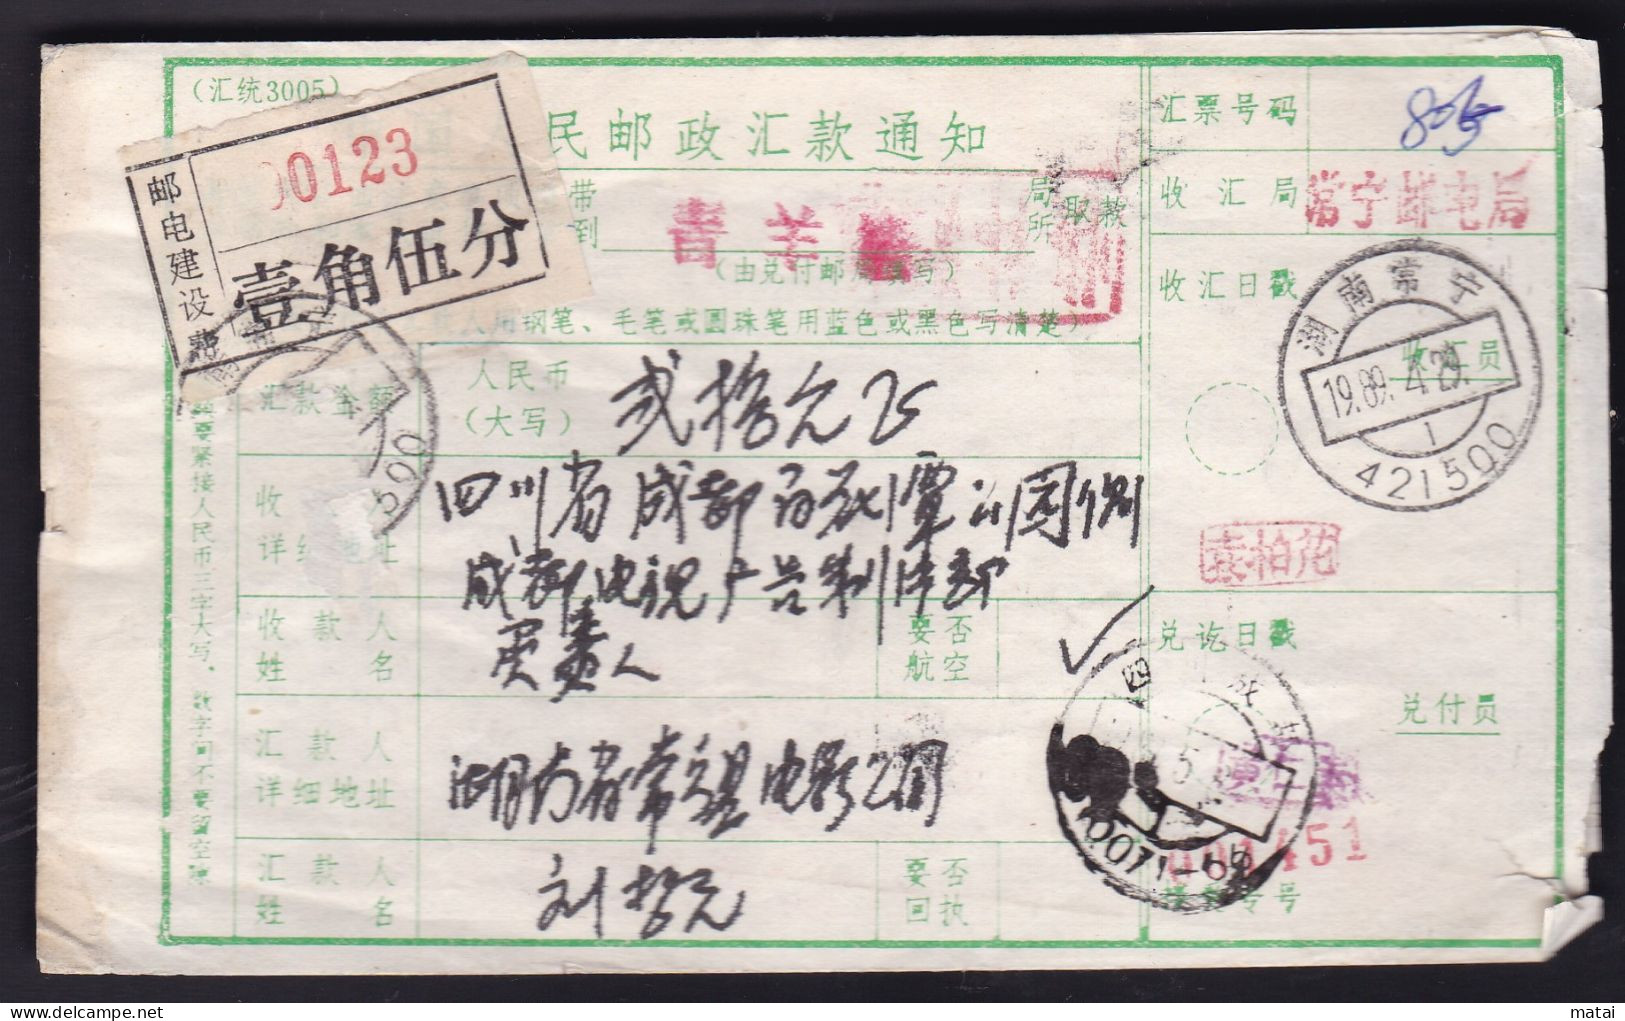 CHINA CHINE CINA COVER WITH HUNAN CHANGNING 421500  ADDED CHARGE LABEL (ACL) 0.15 YUAN - Storia Postale